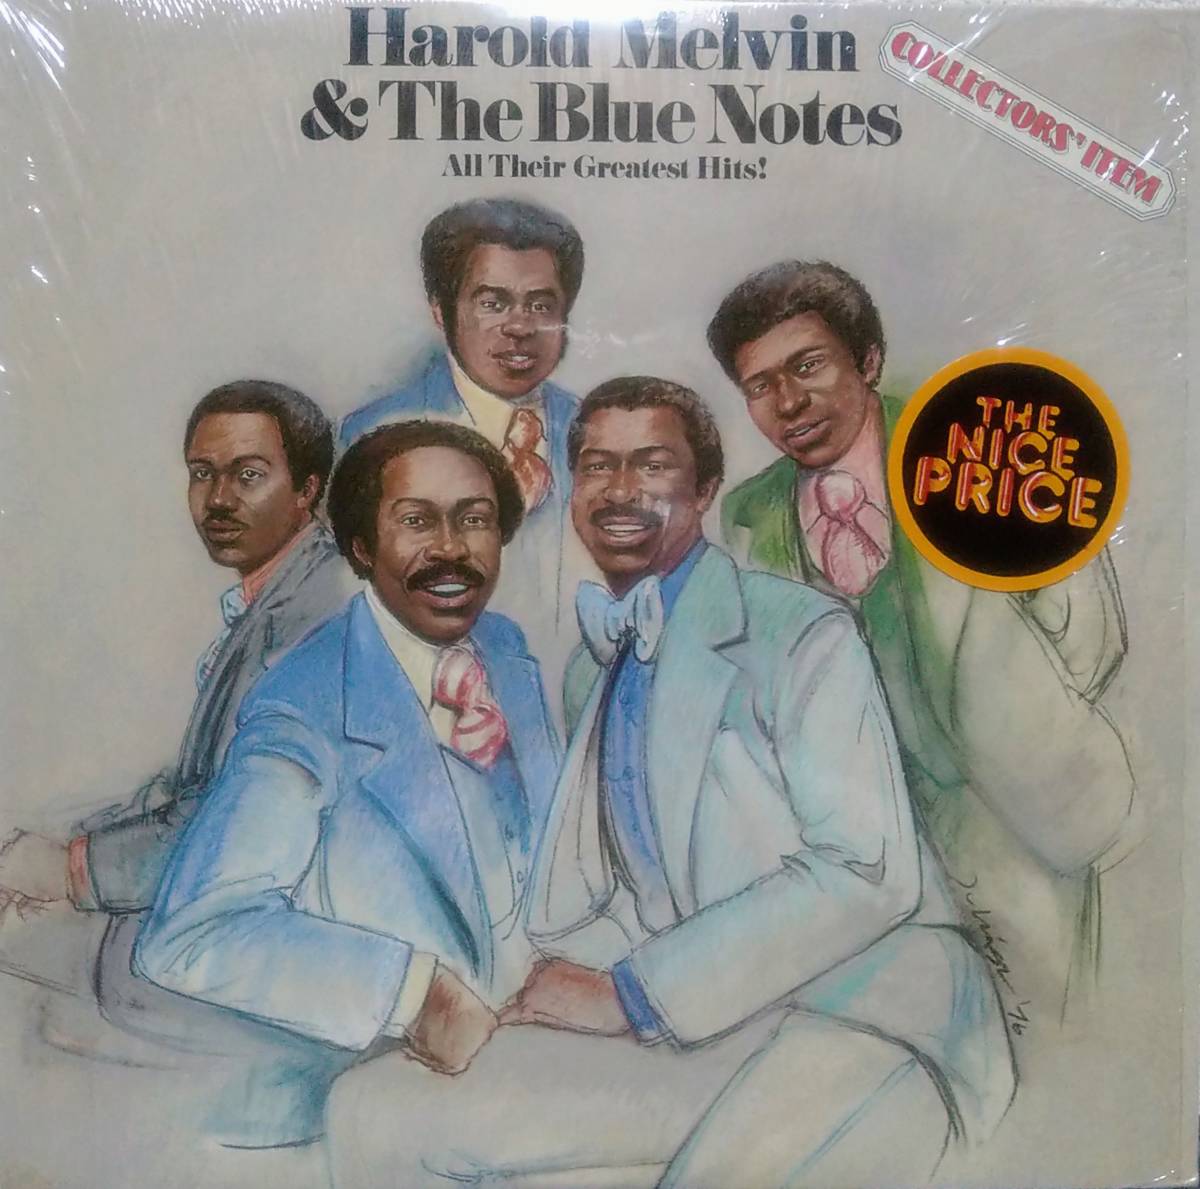 【LP Soul】Harold Melvin & The Blue Notes「All Their Greatest Hits Collectors' Item」US盤 シュリンク付 The Love I Lost.他 収録！_ジャケット